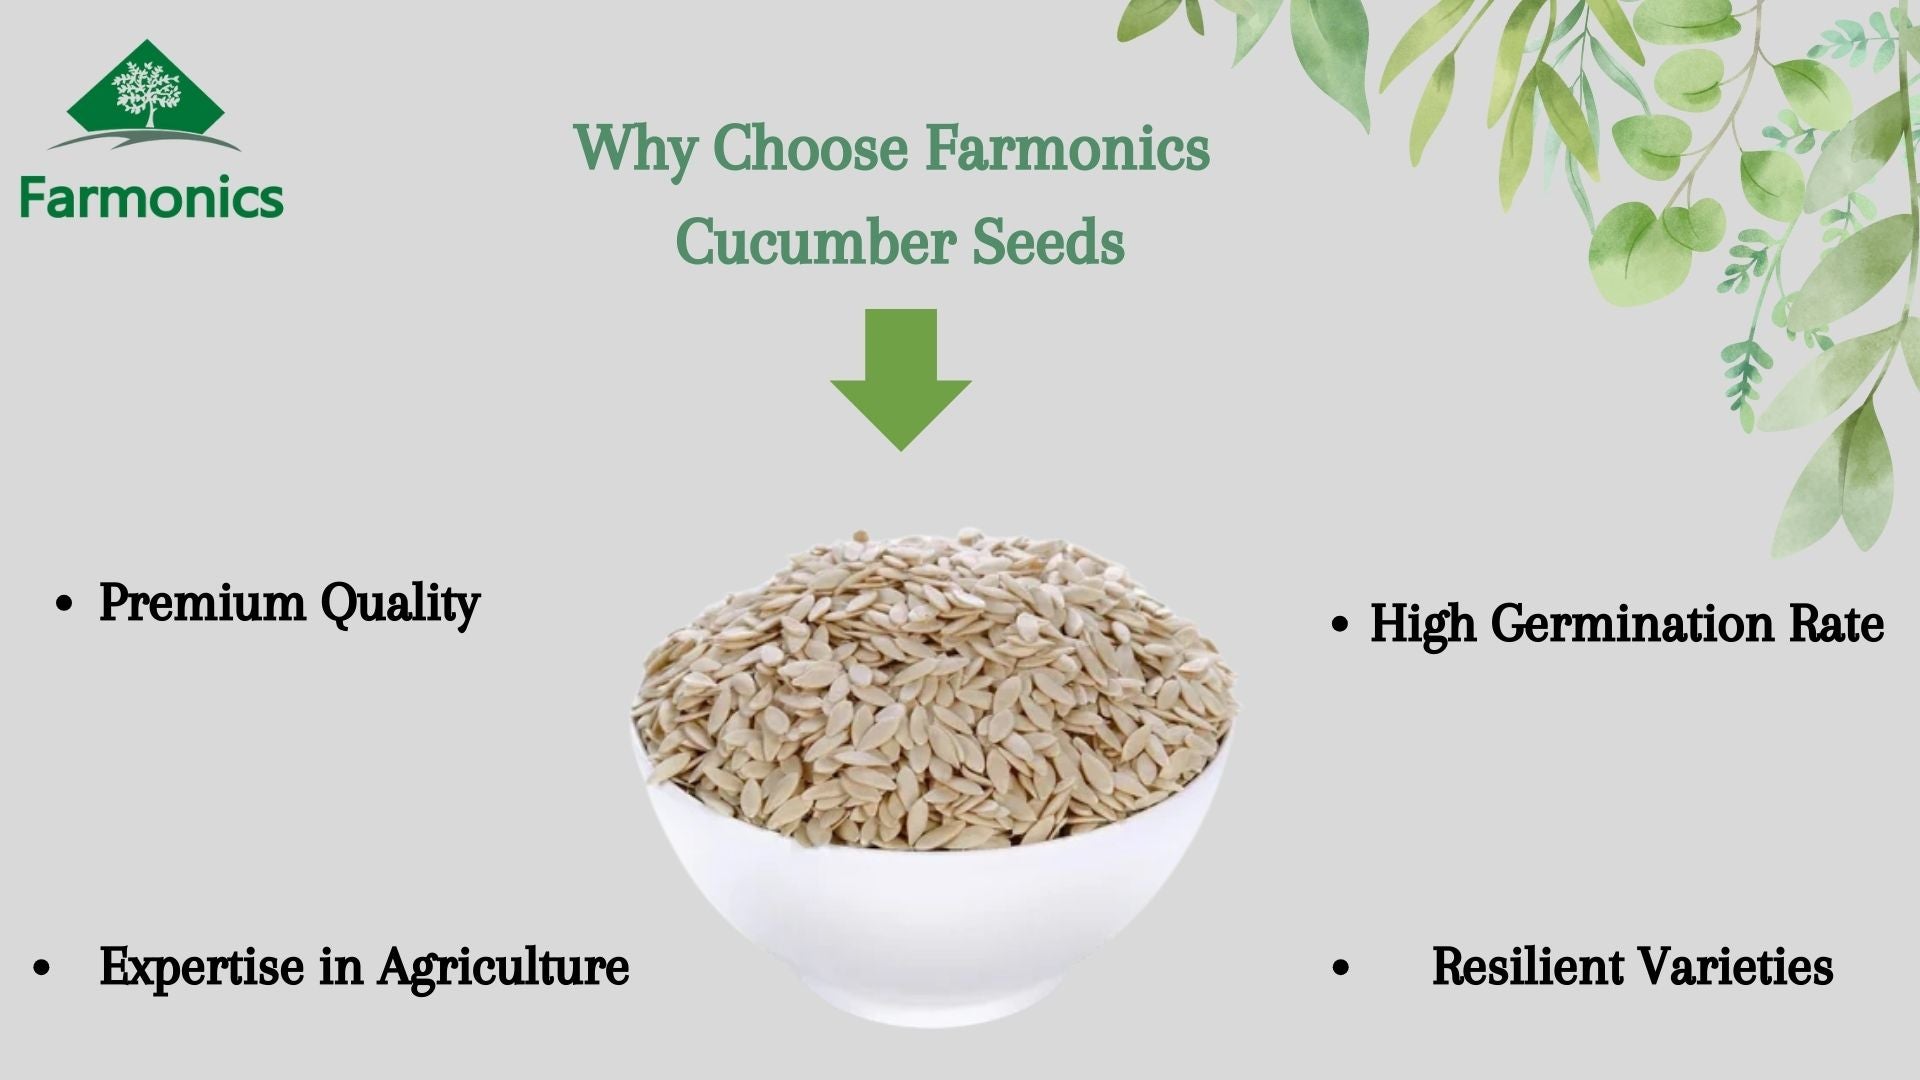 here are the resaons why you should use farmonics best quality cucumber seeds